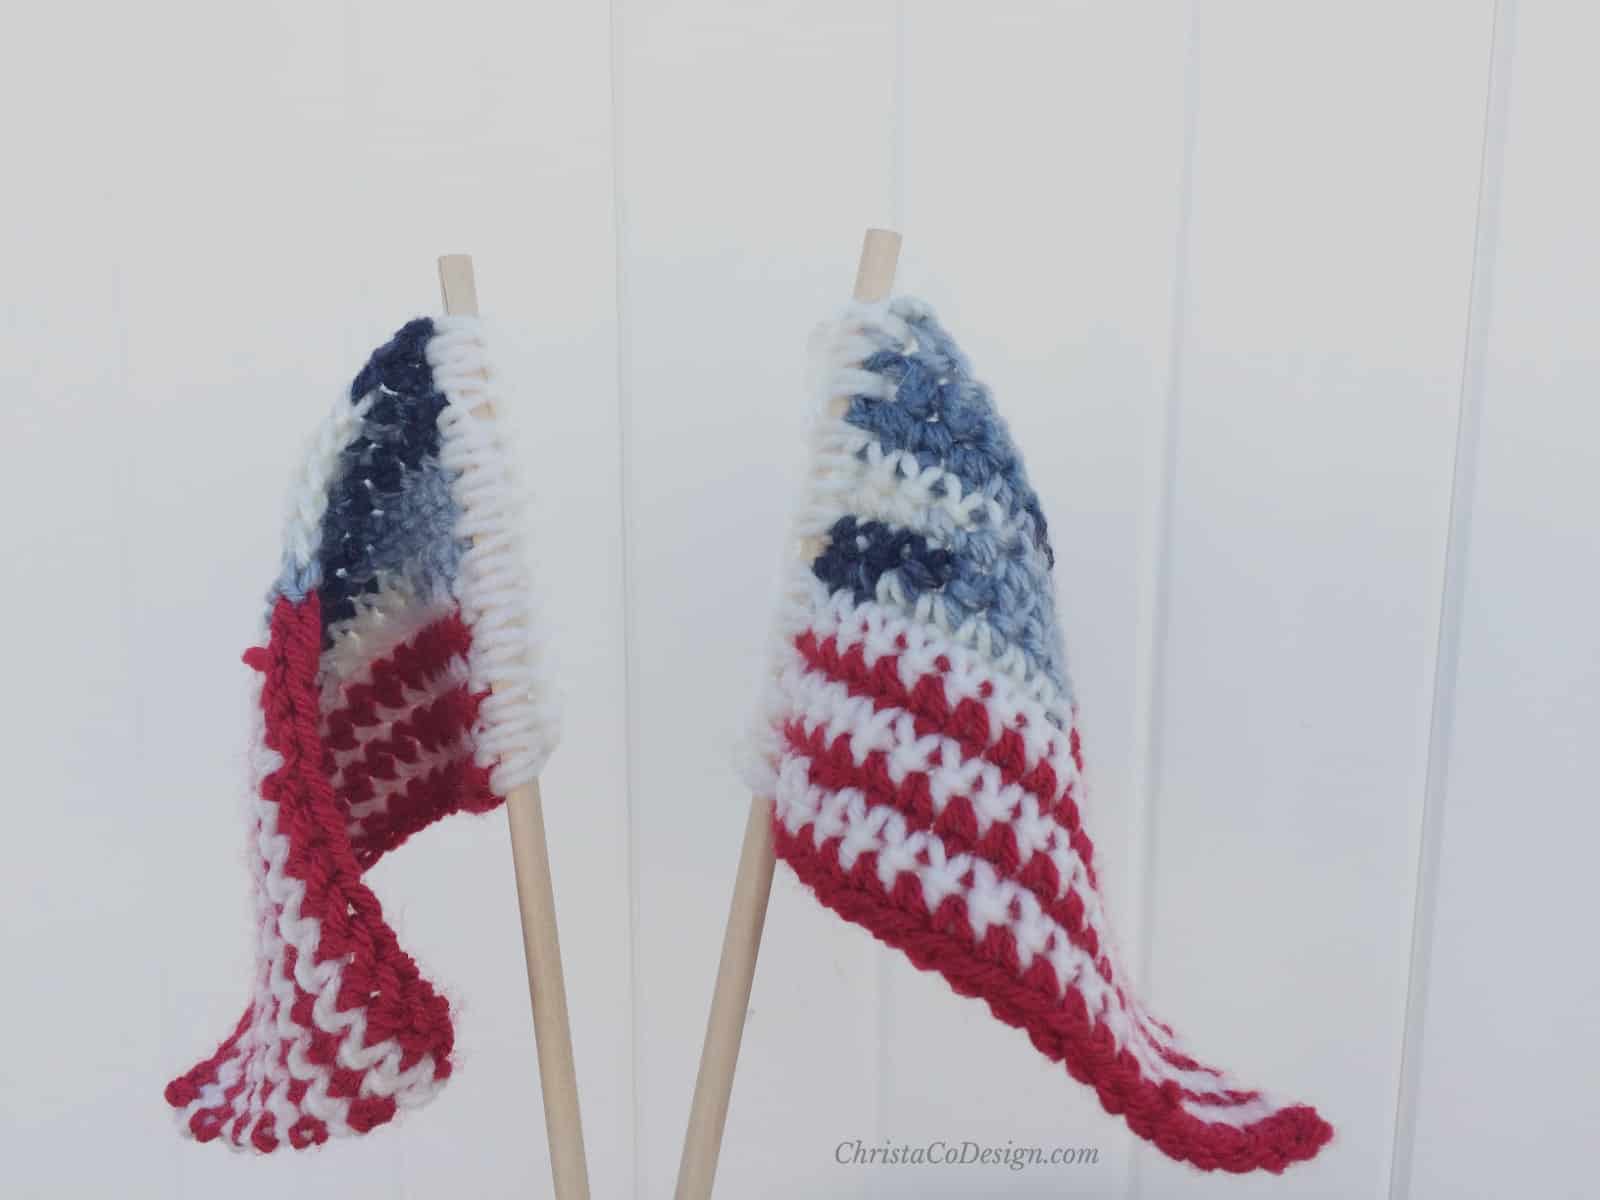 Two small crochet American flags on dowels in front of white fence.  